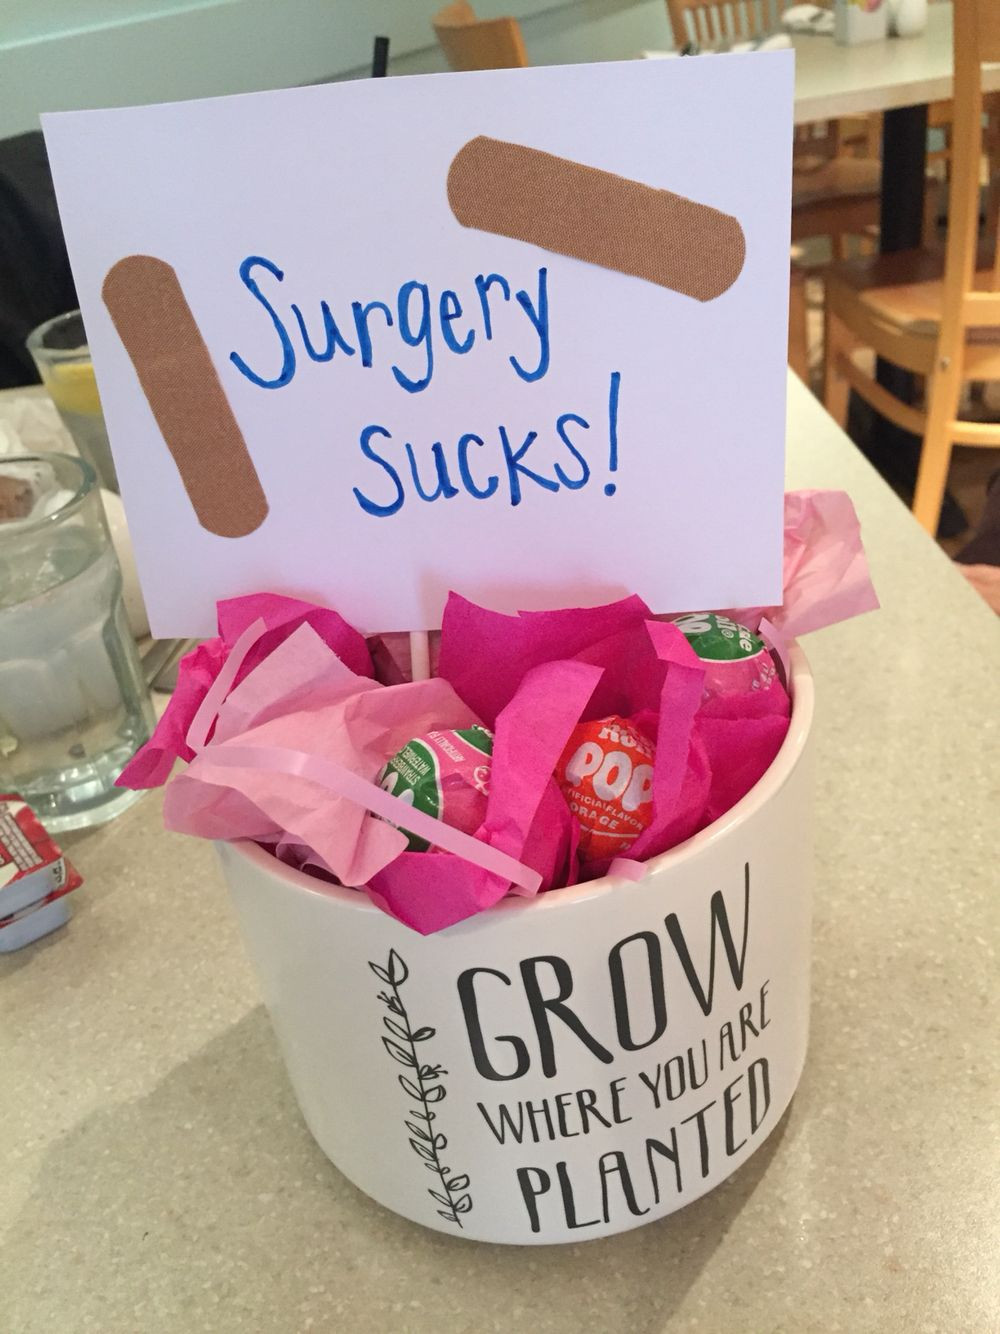 Get Well Gift Basket Ideas After Surgery
 DIY t for friend family having surgery Fill vase with